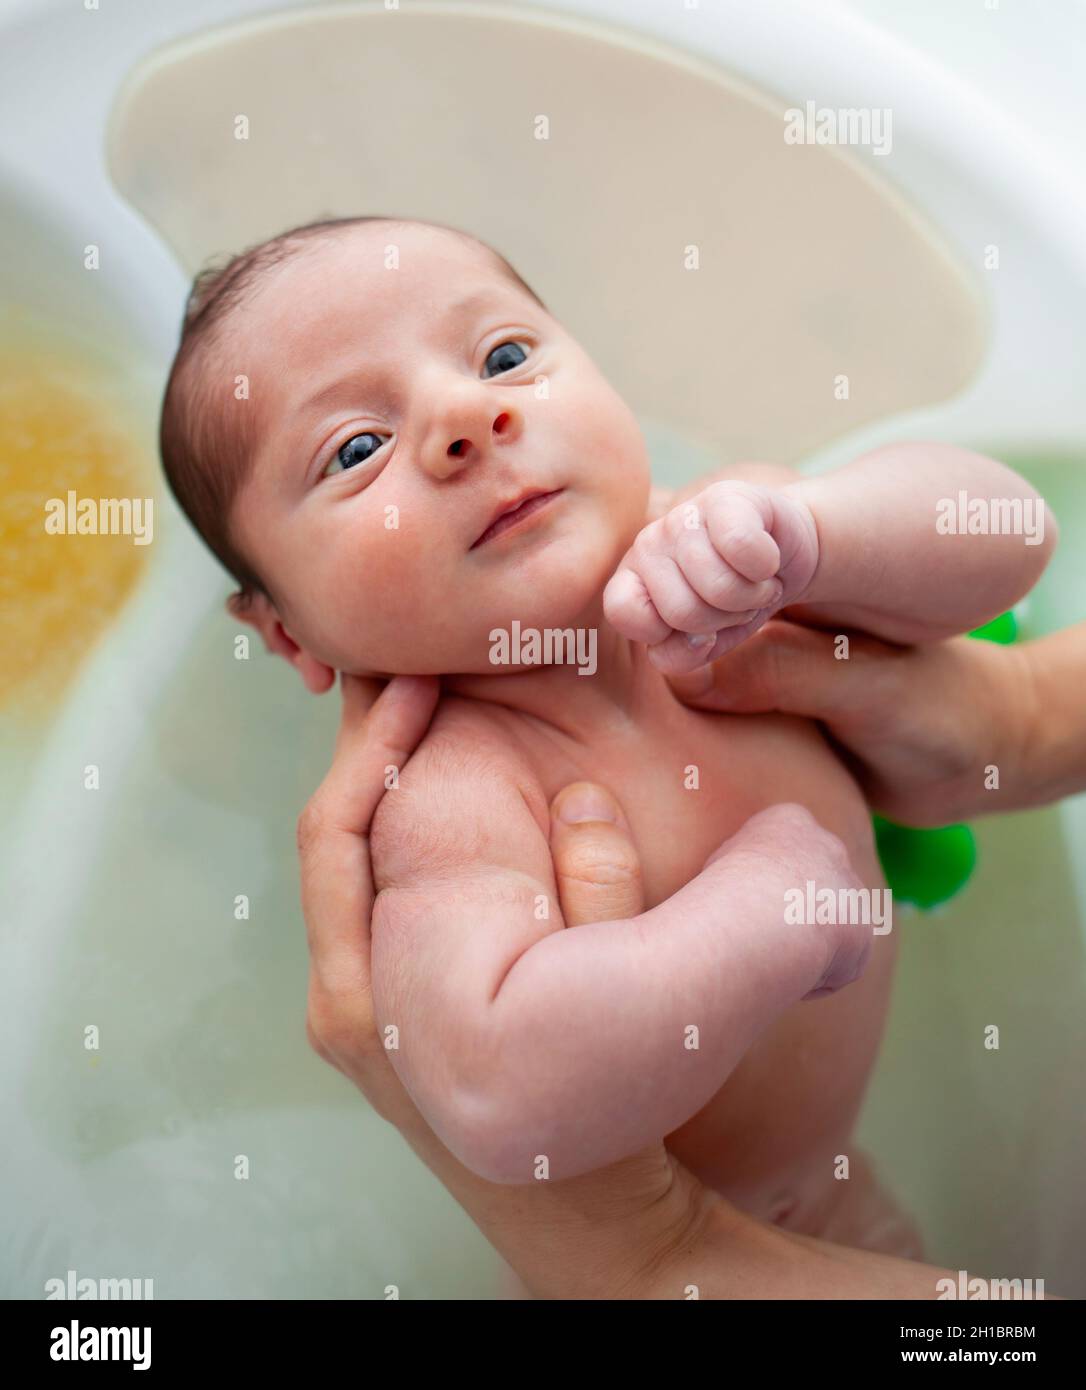 First bath of newborn baby boy. The first bath for a newborn is always a special moment. Stock Photo